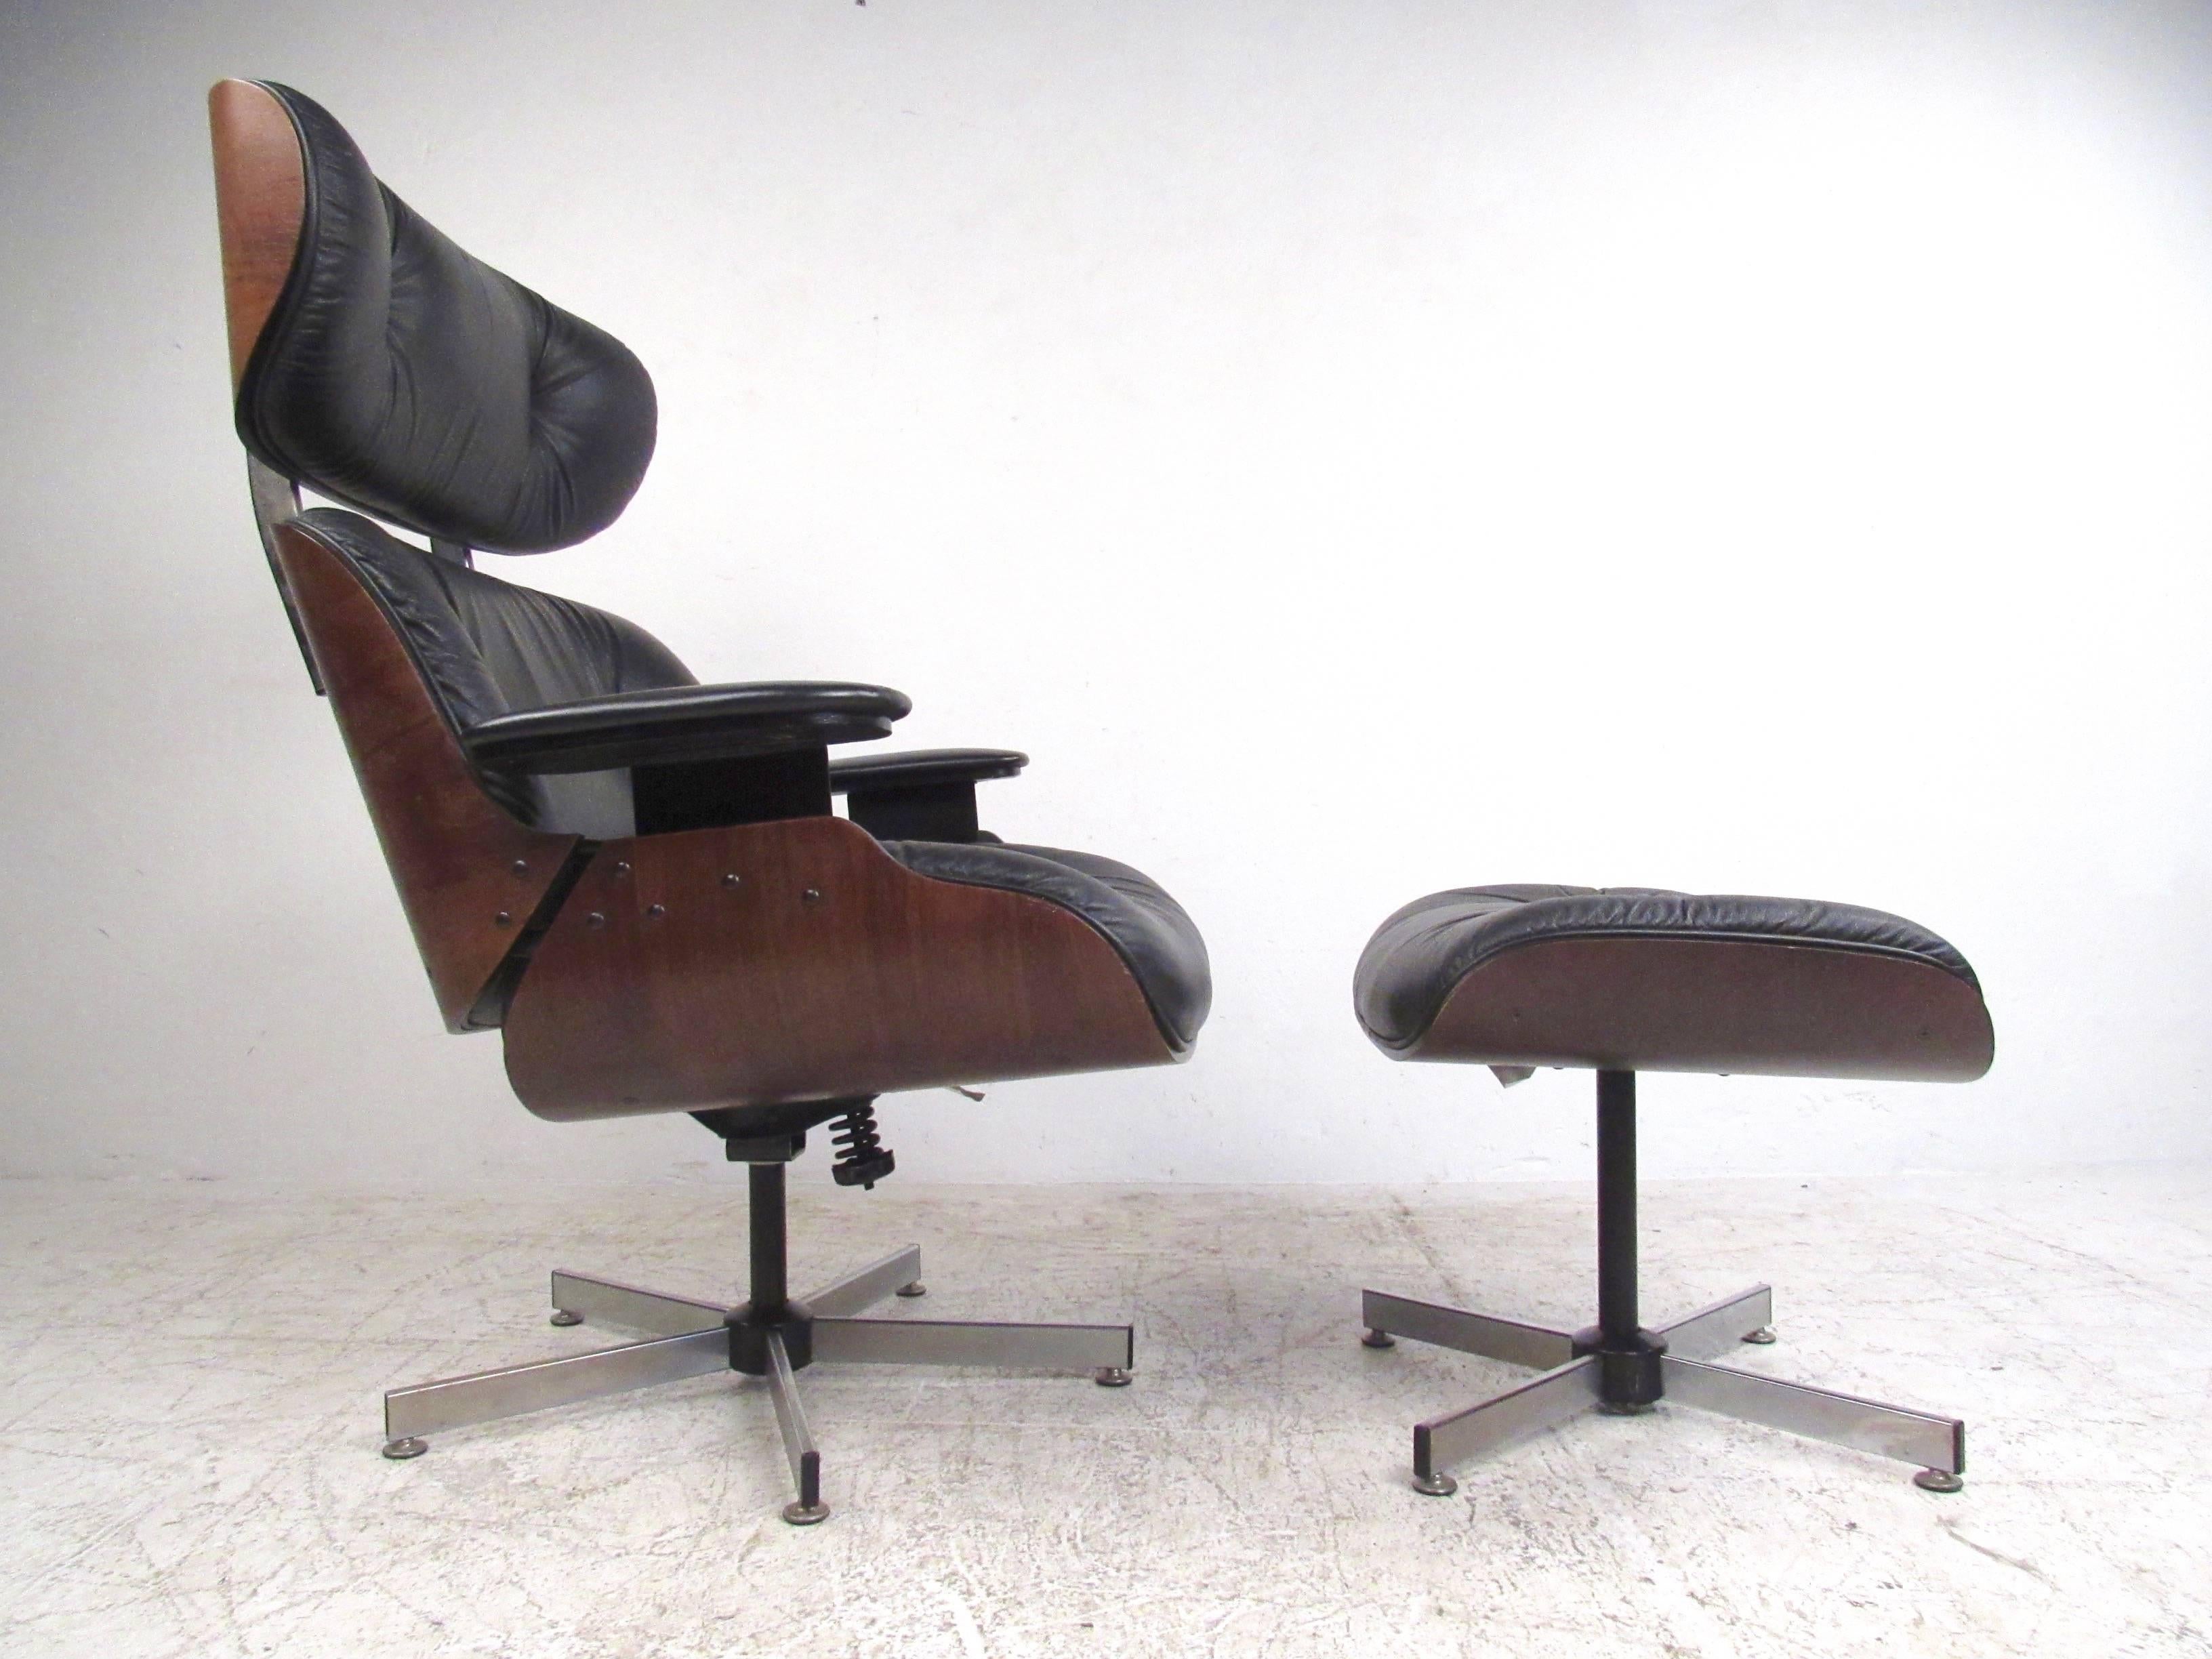 20th Century Pair of Mid-Century Modern Eames Style Lounge Chairs by Plycraft